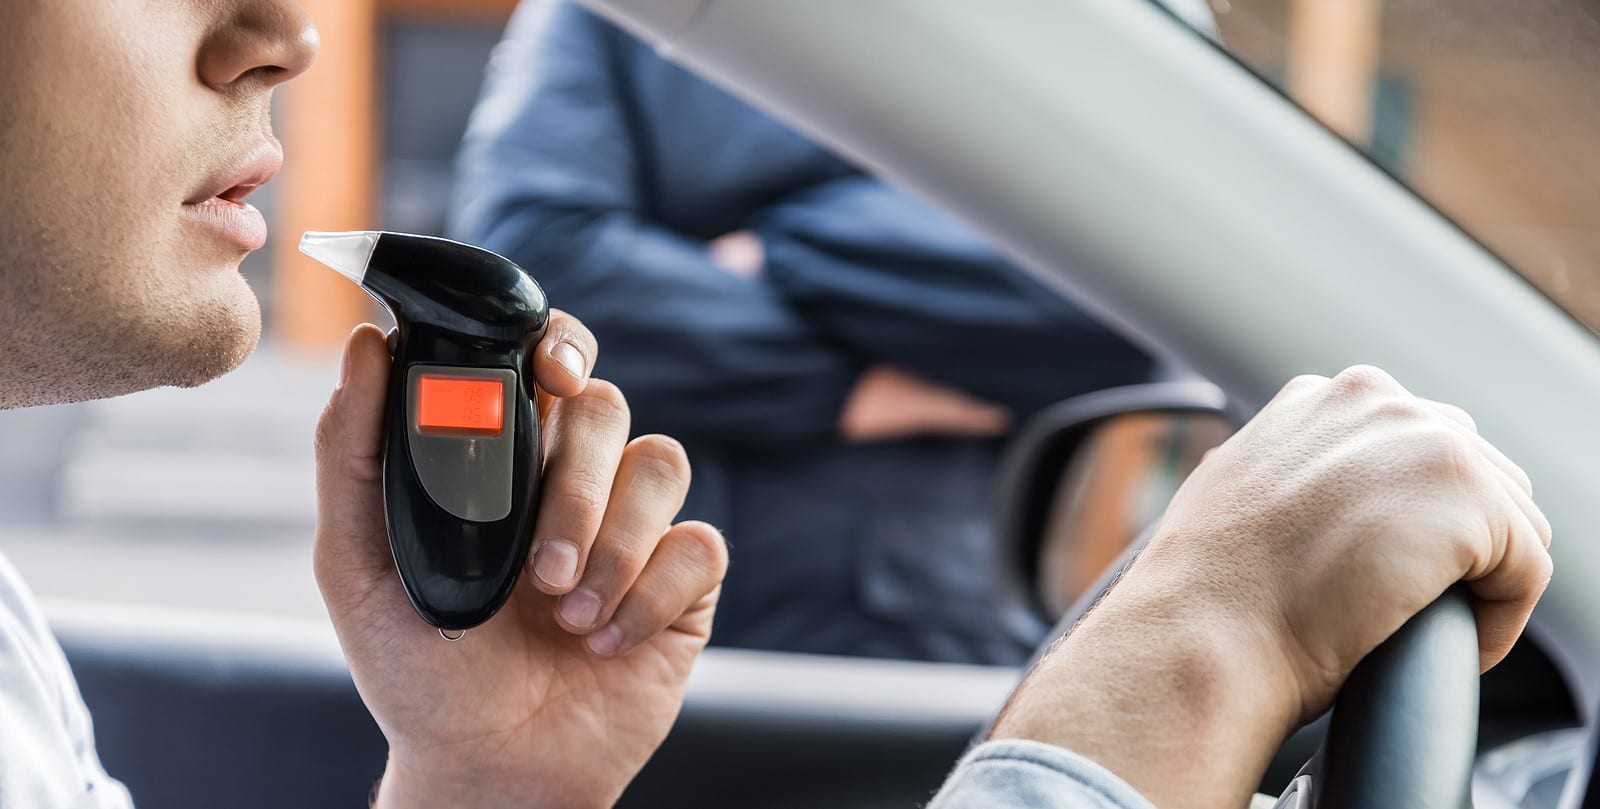 Challenging the Accuracy of Breathalyzer Tests in San Bernardino DUI Cases